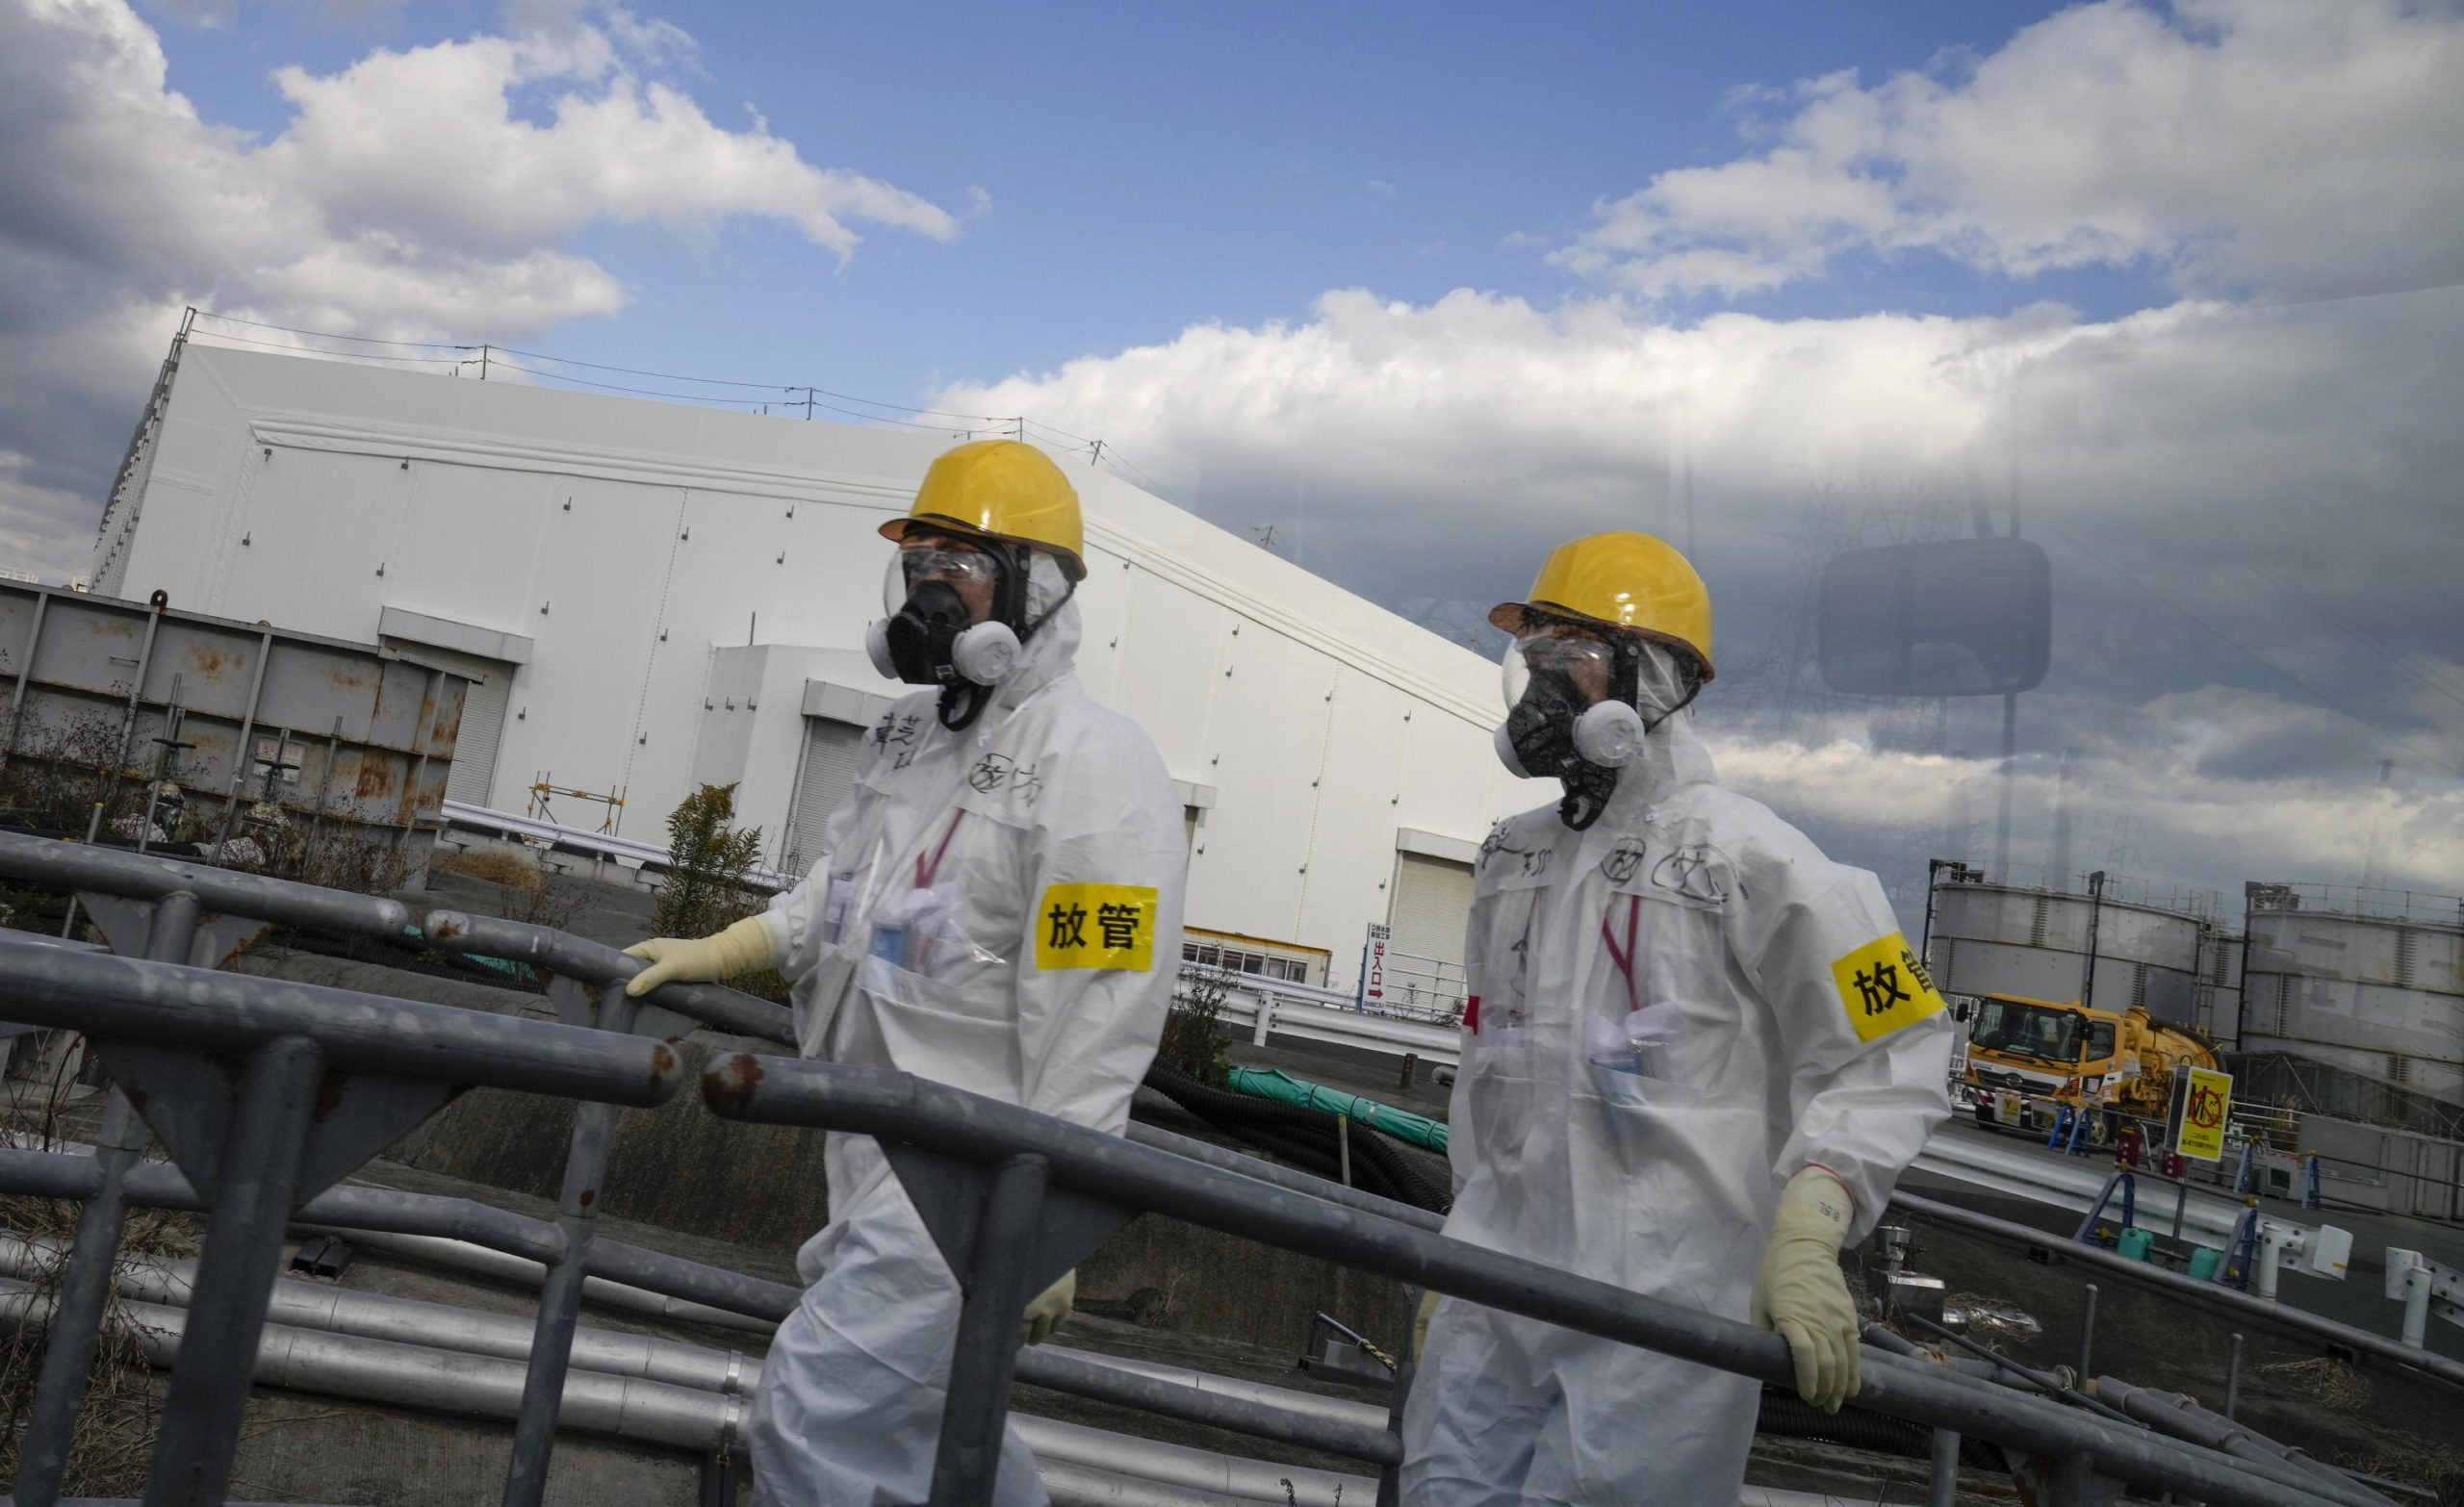 epa09583463 Workers wearing full-protective suits and masks walk past Multi-nuclide Removal Facility (Advanced Liquid Processing System = ALPS) during the decommissioning work at the tsunami-crippled Tokyo Electric Power Company's Fukushima Daiichi Nuclear Power Plant in Oma, Fukushima Prefecture, Japan, 15 November 2021. The Japanese government and TEPCO have estimated the decommissioning work will take between 30 and 40 years starting 2011, while contaminated water and treatment of fuel debris make the work more difficult. Former Japanese prime minister Yoshihide Suga said in April 2021 that releasing the treated water into the sea is a realistic solution. TEPCO plans to begin the release of contaminated water, treated by Multi-nuclide Removal Facility (Advanced Liquid Processing System = ALPS), into the Pacific Ocean through undersea tunnels in 2023.  EPA/KIMIMASA MAYAMA/POOL